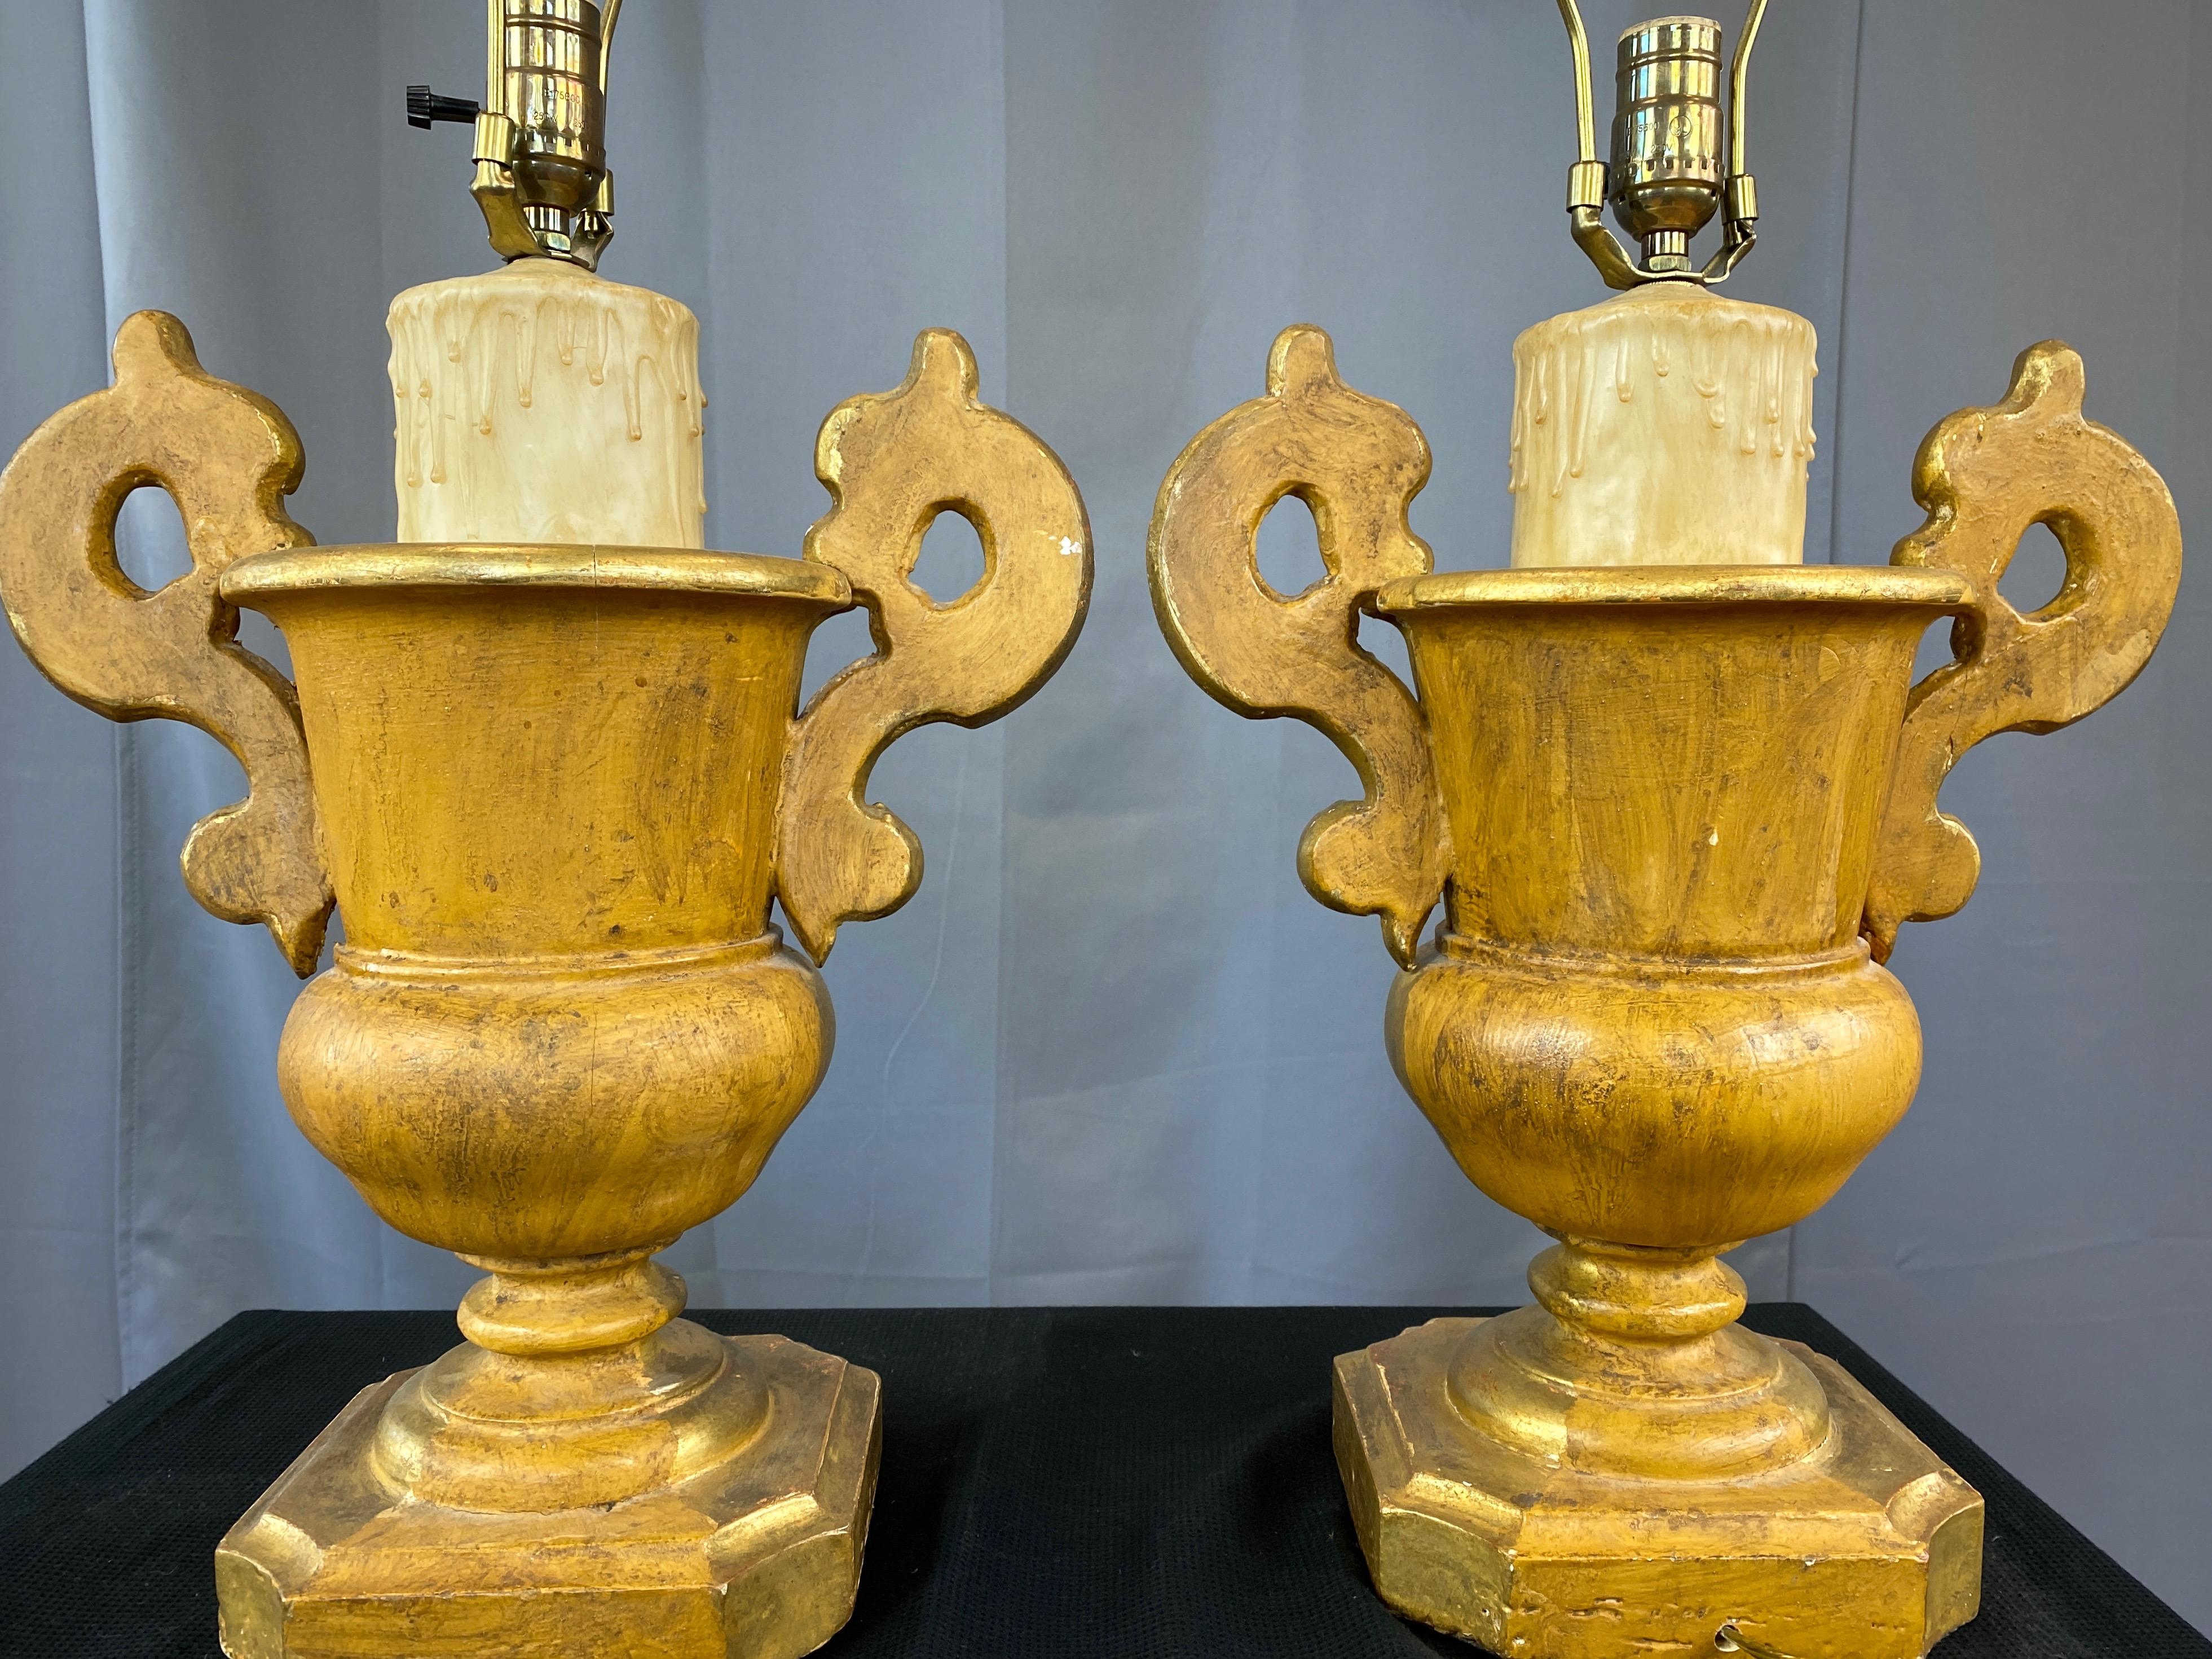 Paper Pair of Italian Baroque Revival Giltwood Urn and Faux Candle Table Lamps, 1930s For Sale